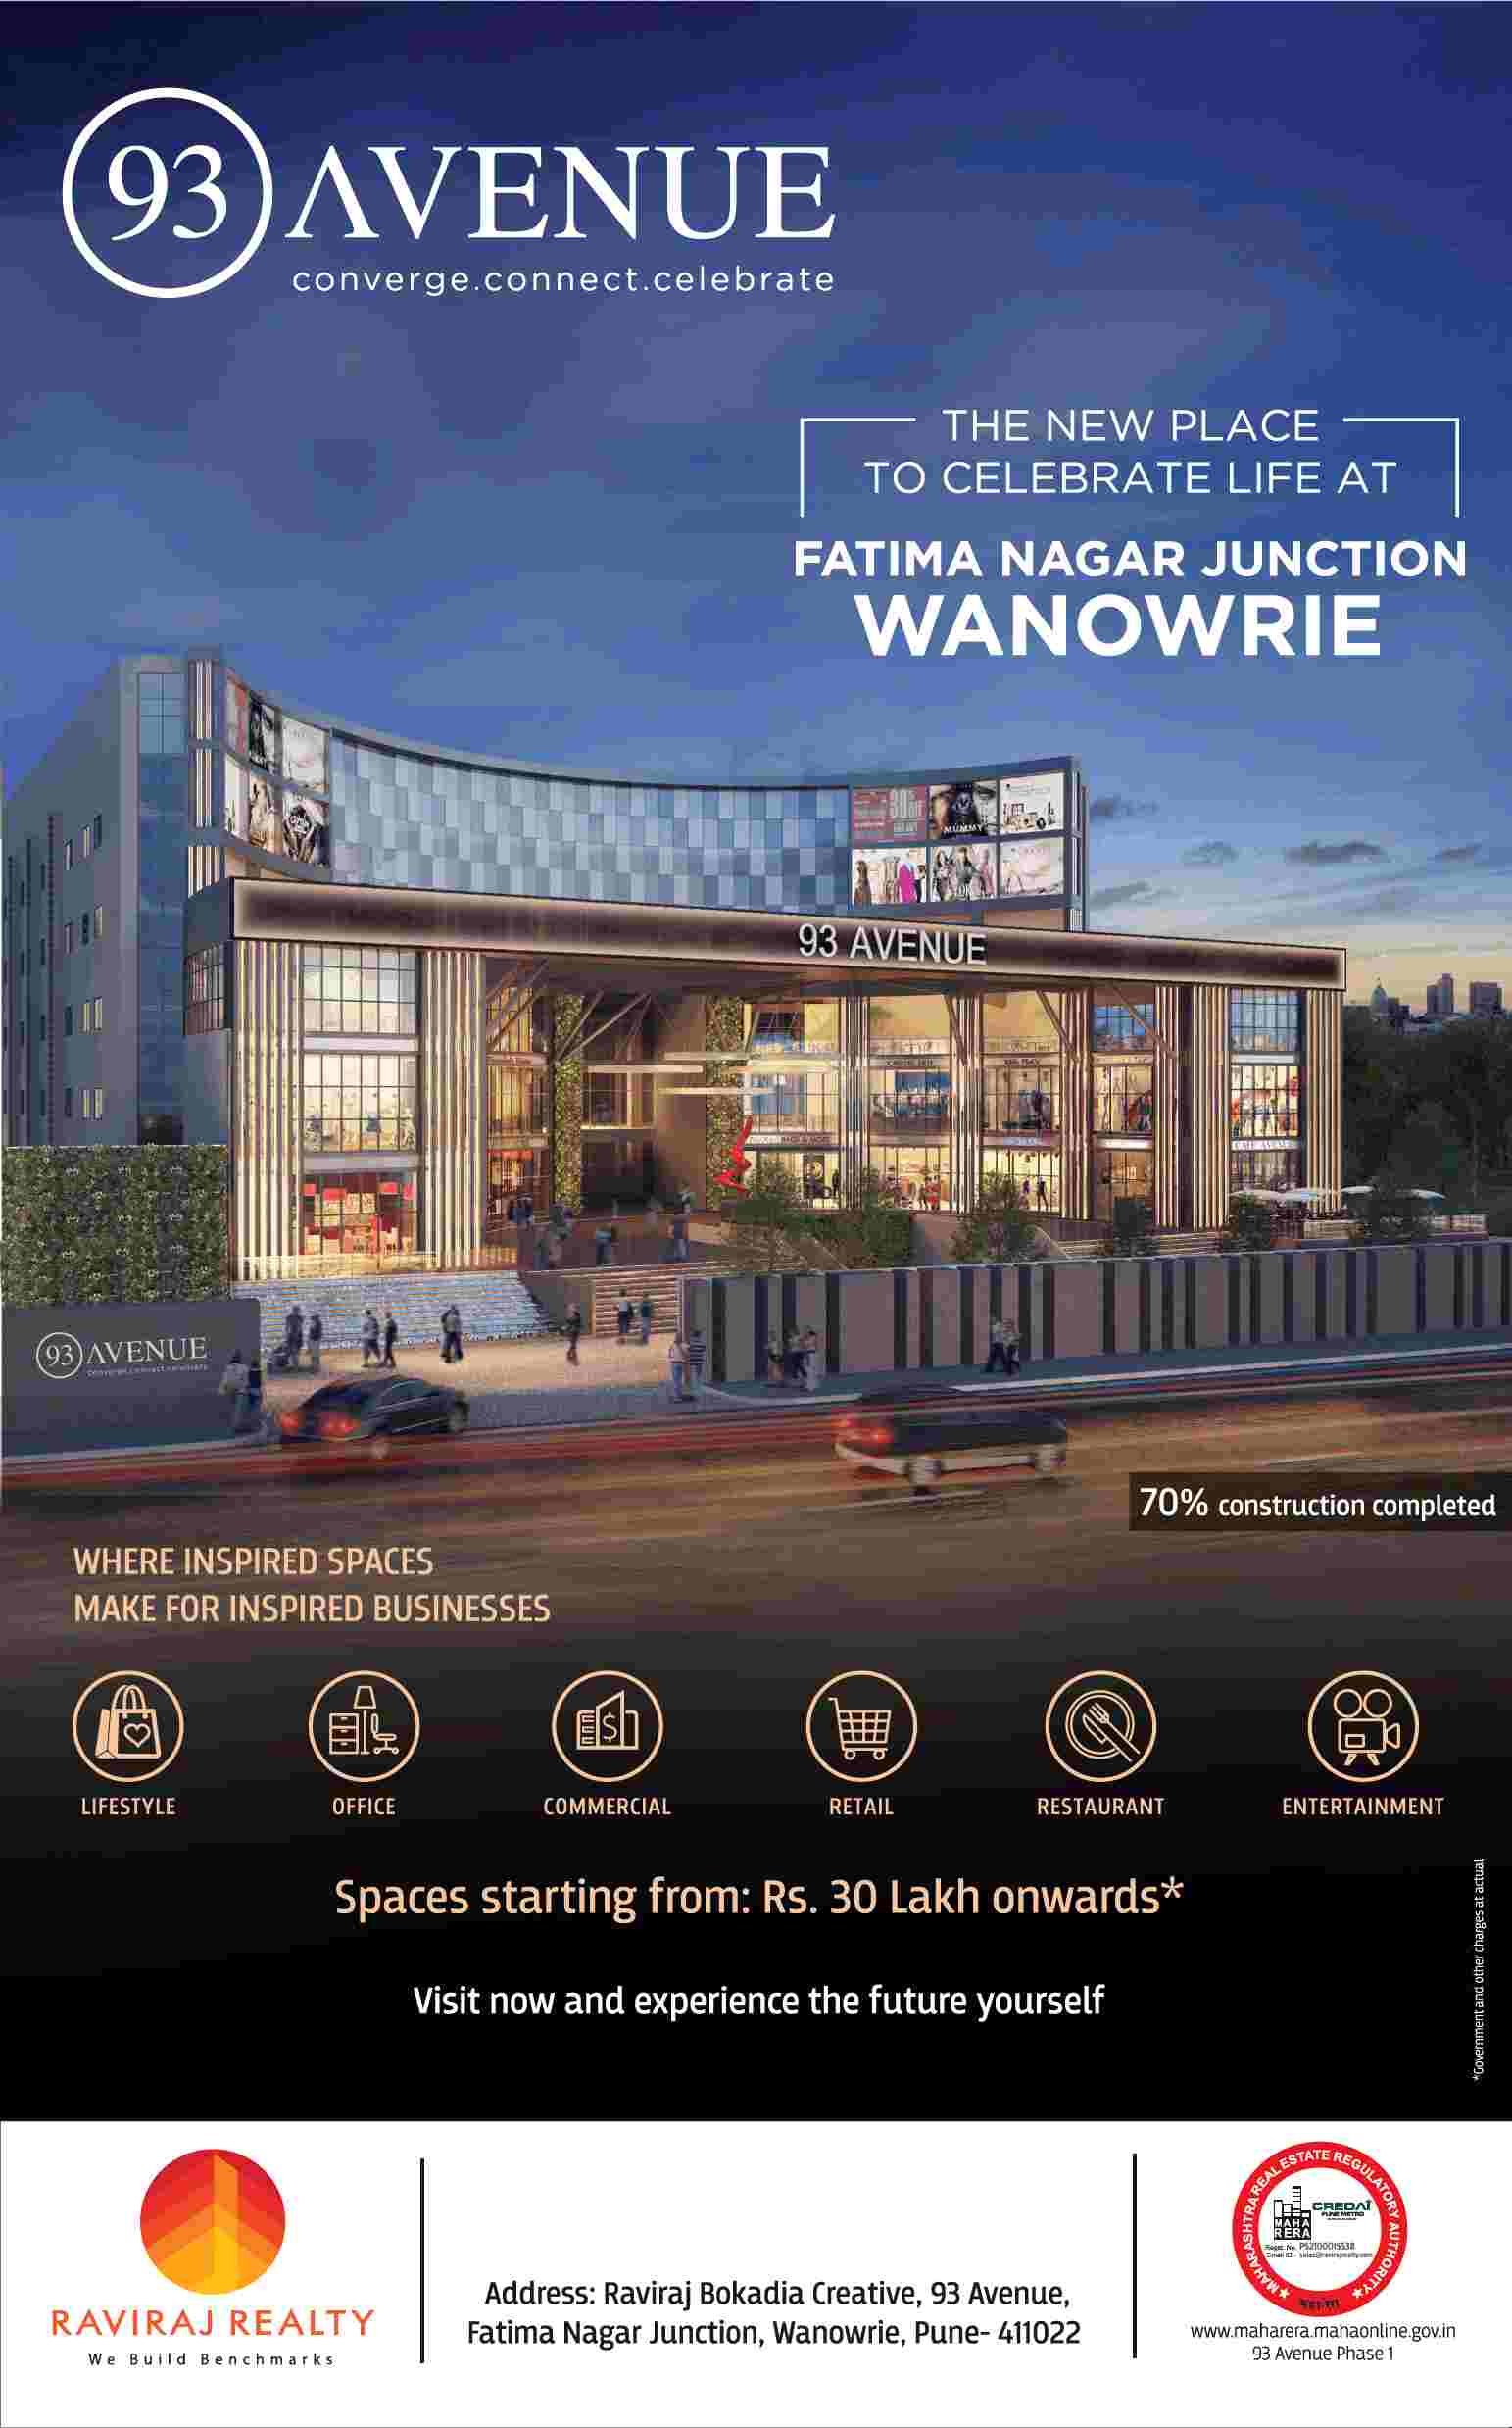 Book inspired spaces made for inspired business at Raviraj 93 Avenue in Pune Update